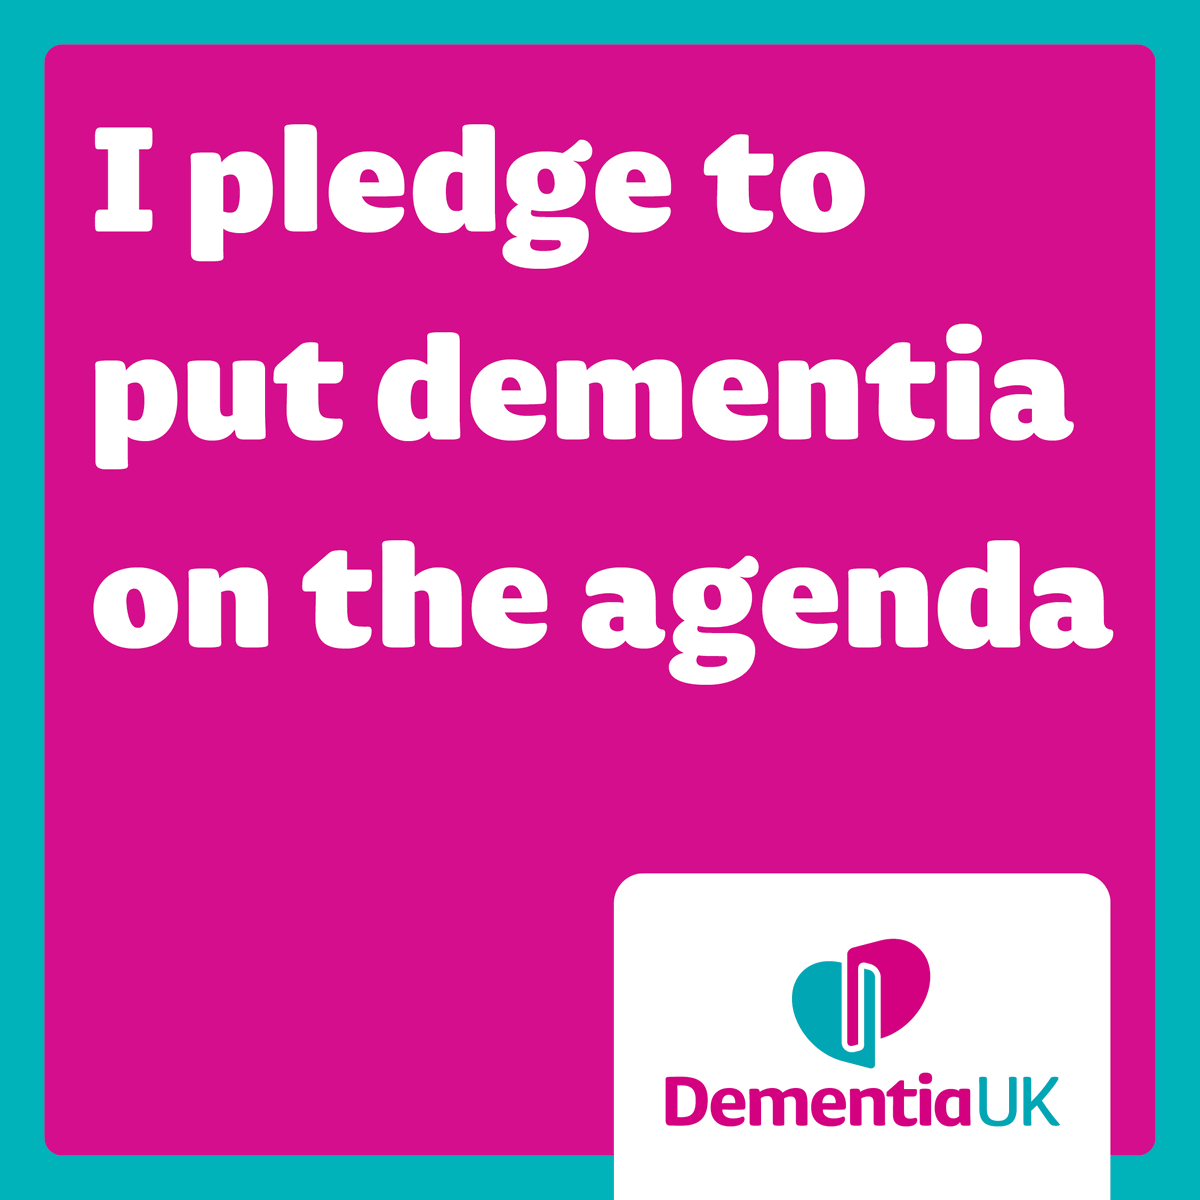 Half of us will be affected by dementia in our lifetime. 

Therefore, I am supporting @DementiaUK’s manifesto to put dementia on the agenda at the next election and transform dementia care for everyone!

#PutDementiaOnTheAgenda